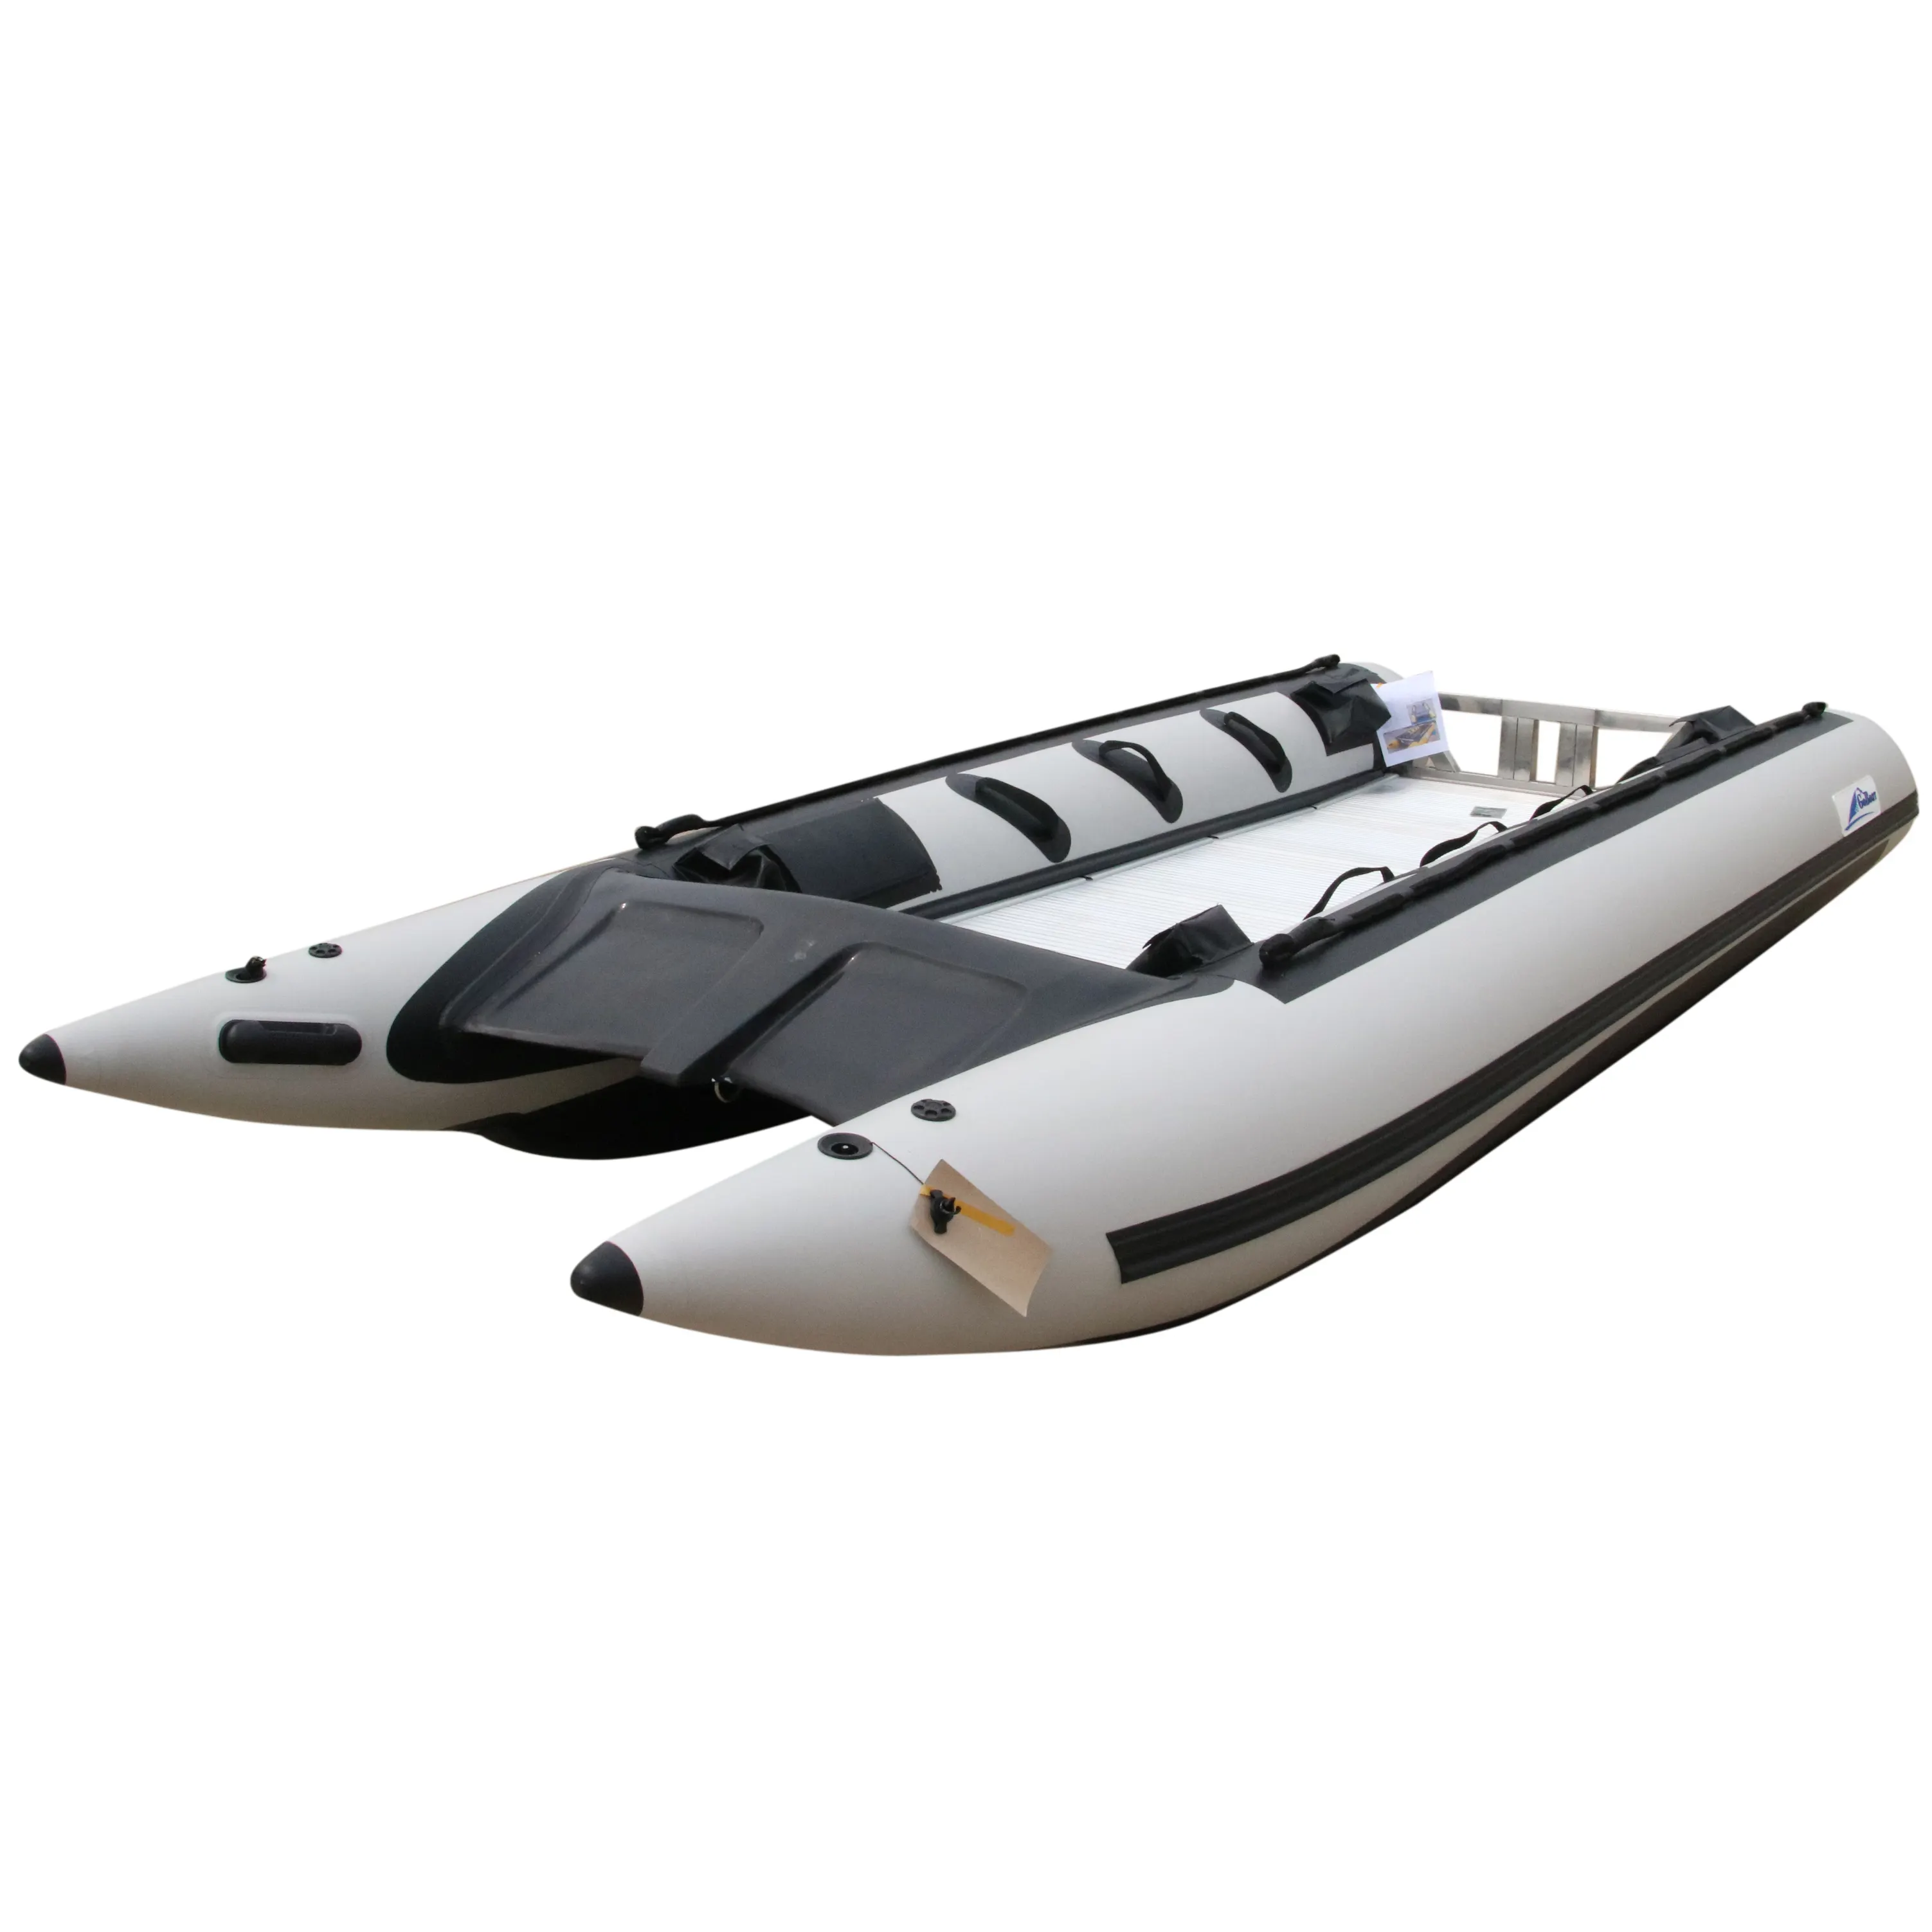 Goethe High Quality Inflatable High Speed Catamaran Boat Thundercat Boat for Sale